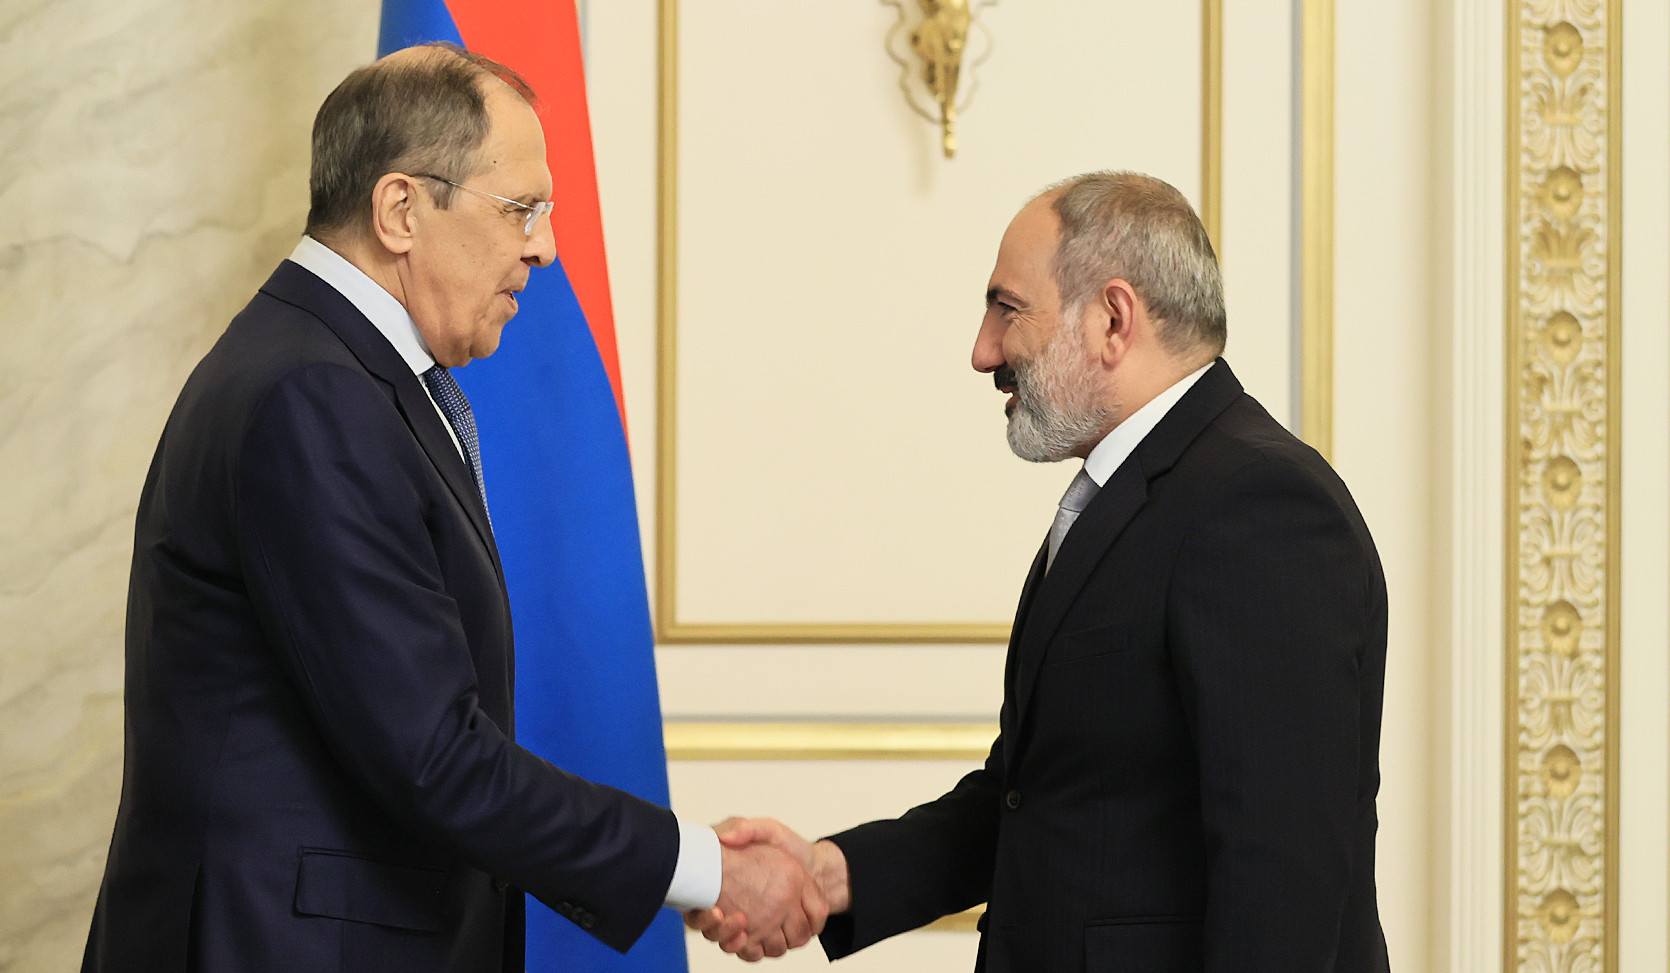 Main issue on our agenda is related to regional security and settlement of Nagorno-Karabakh conflict: Nikol Pashinyan to Sergey Lavrov